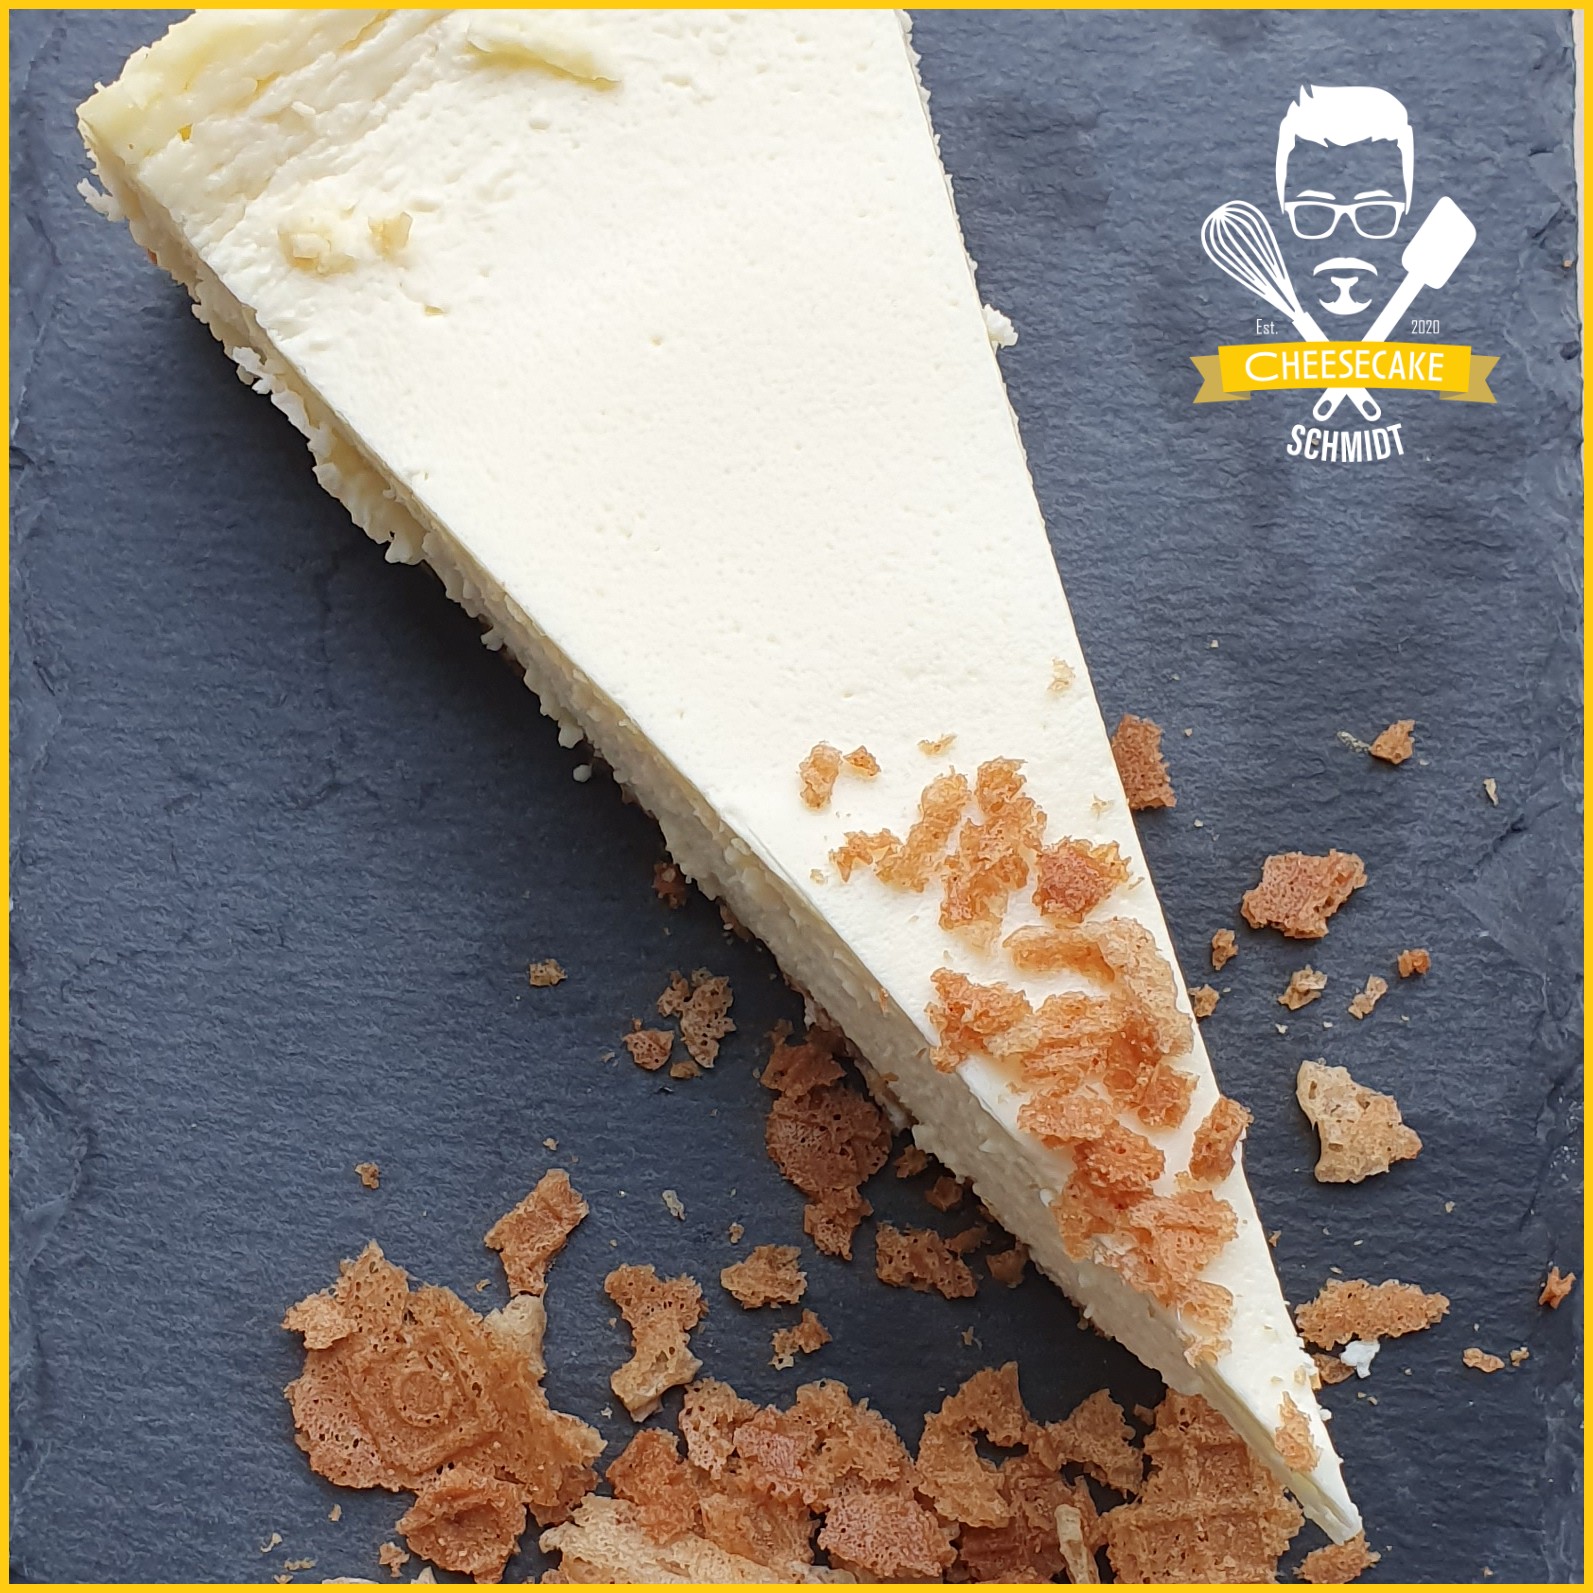 schmidt_cheesecake_muenchen_home_nycheesecake_classic_icon